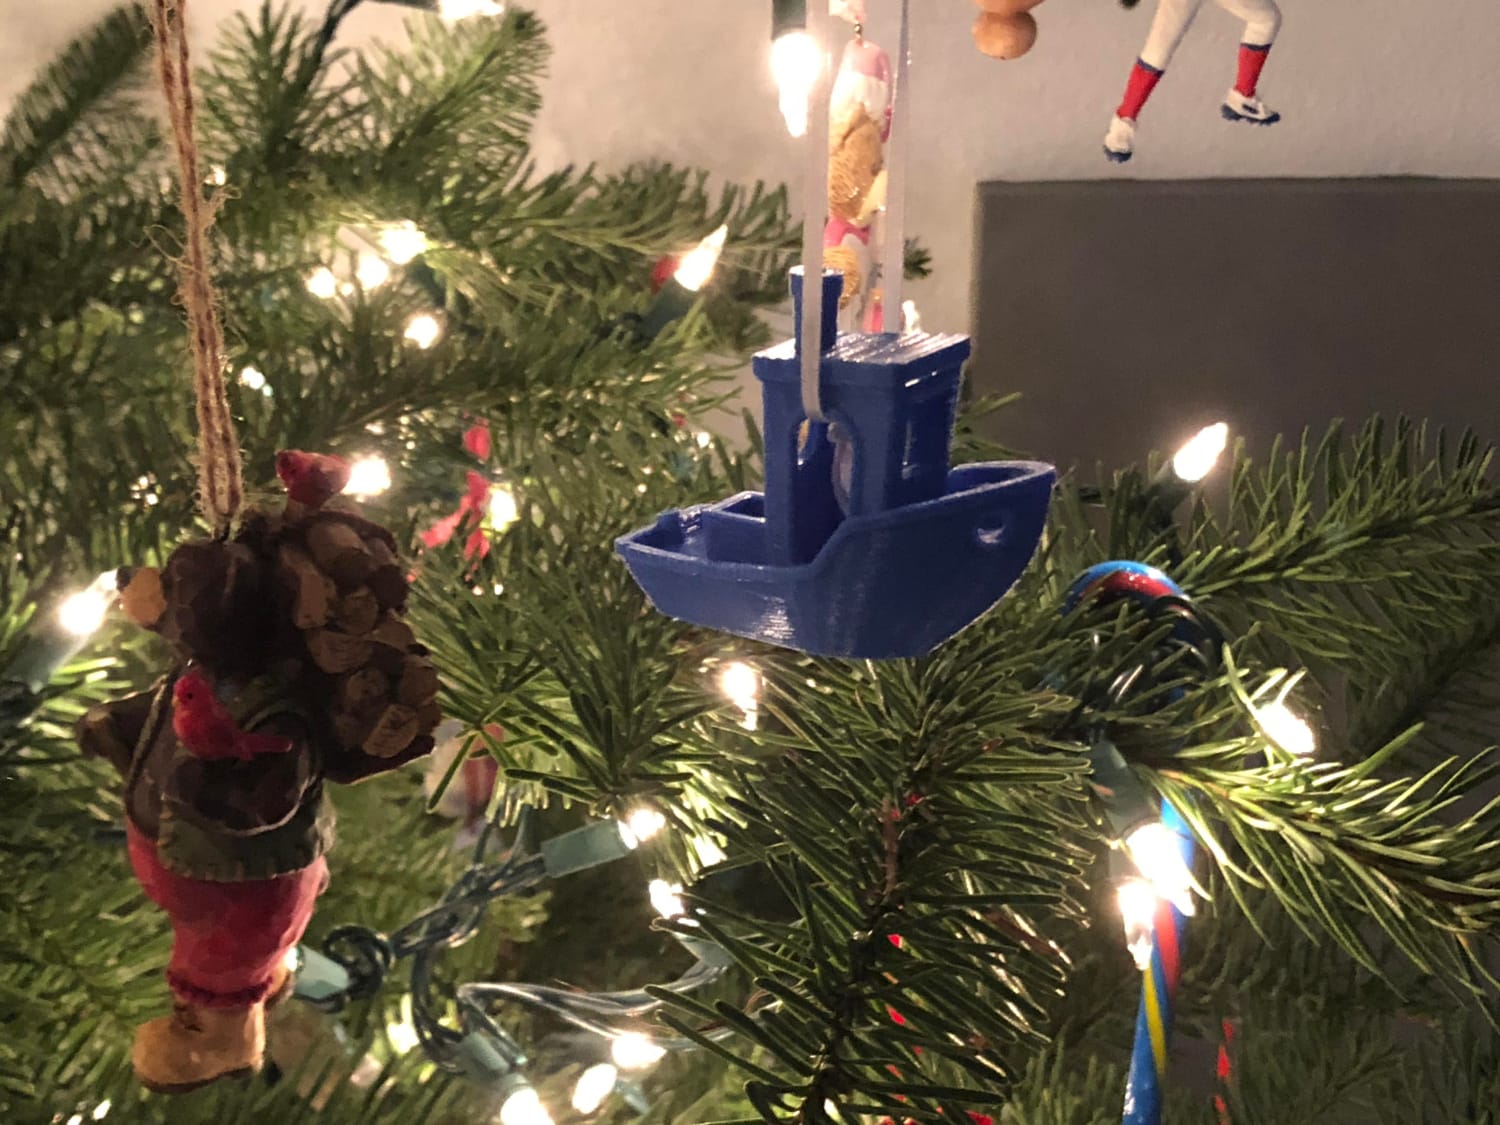 Turns out old Benchy’s make great Christmas ornaments!